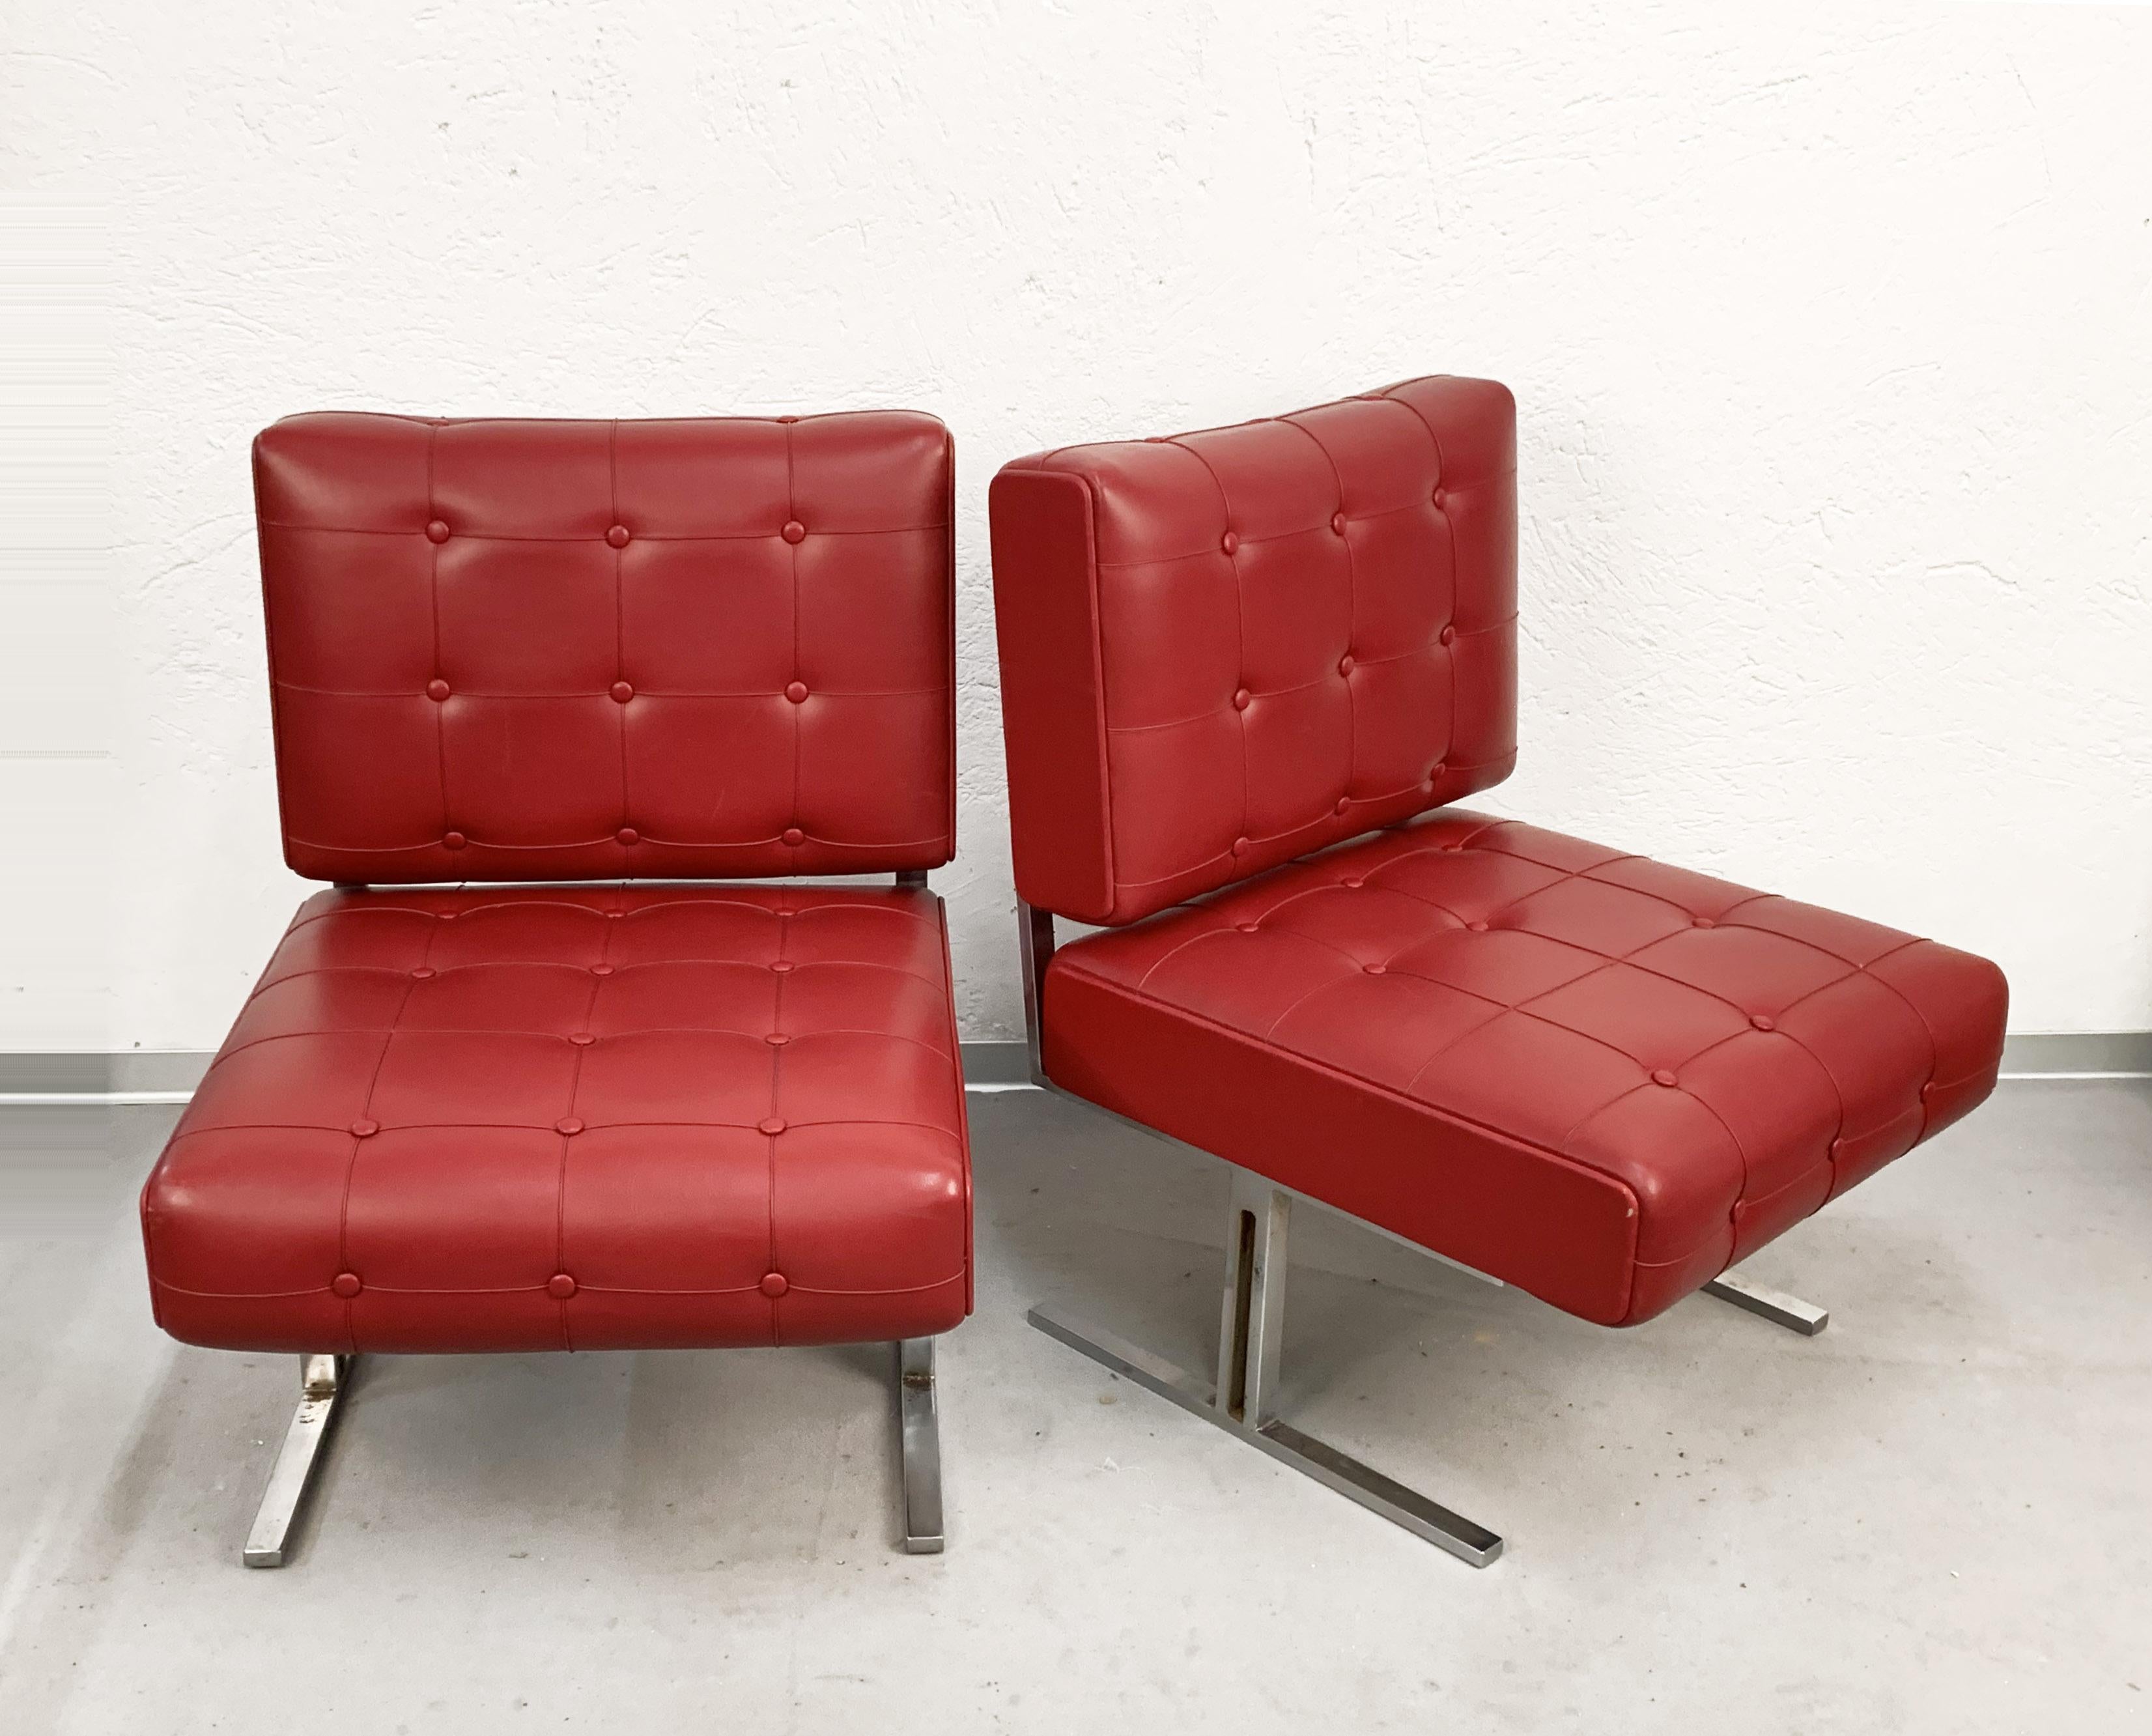 Pair of Steel and Red Faux Leather Armchairs Skay after Hausmann De Sede, 1950s For Sale 10